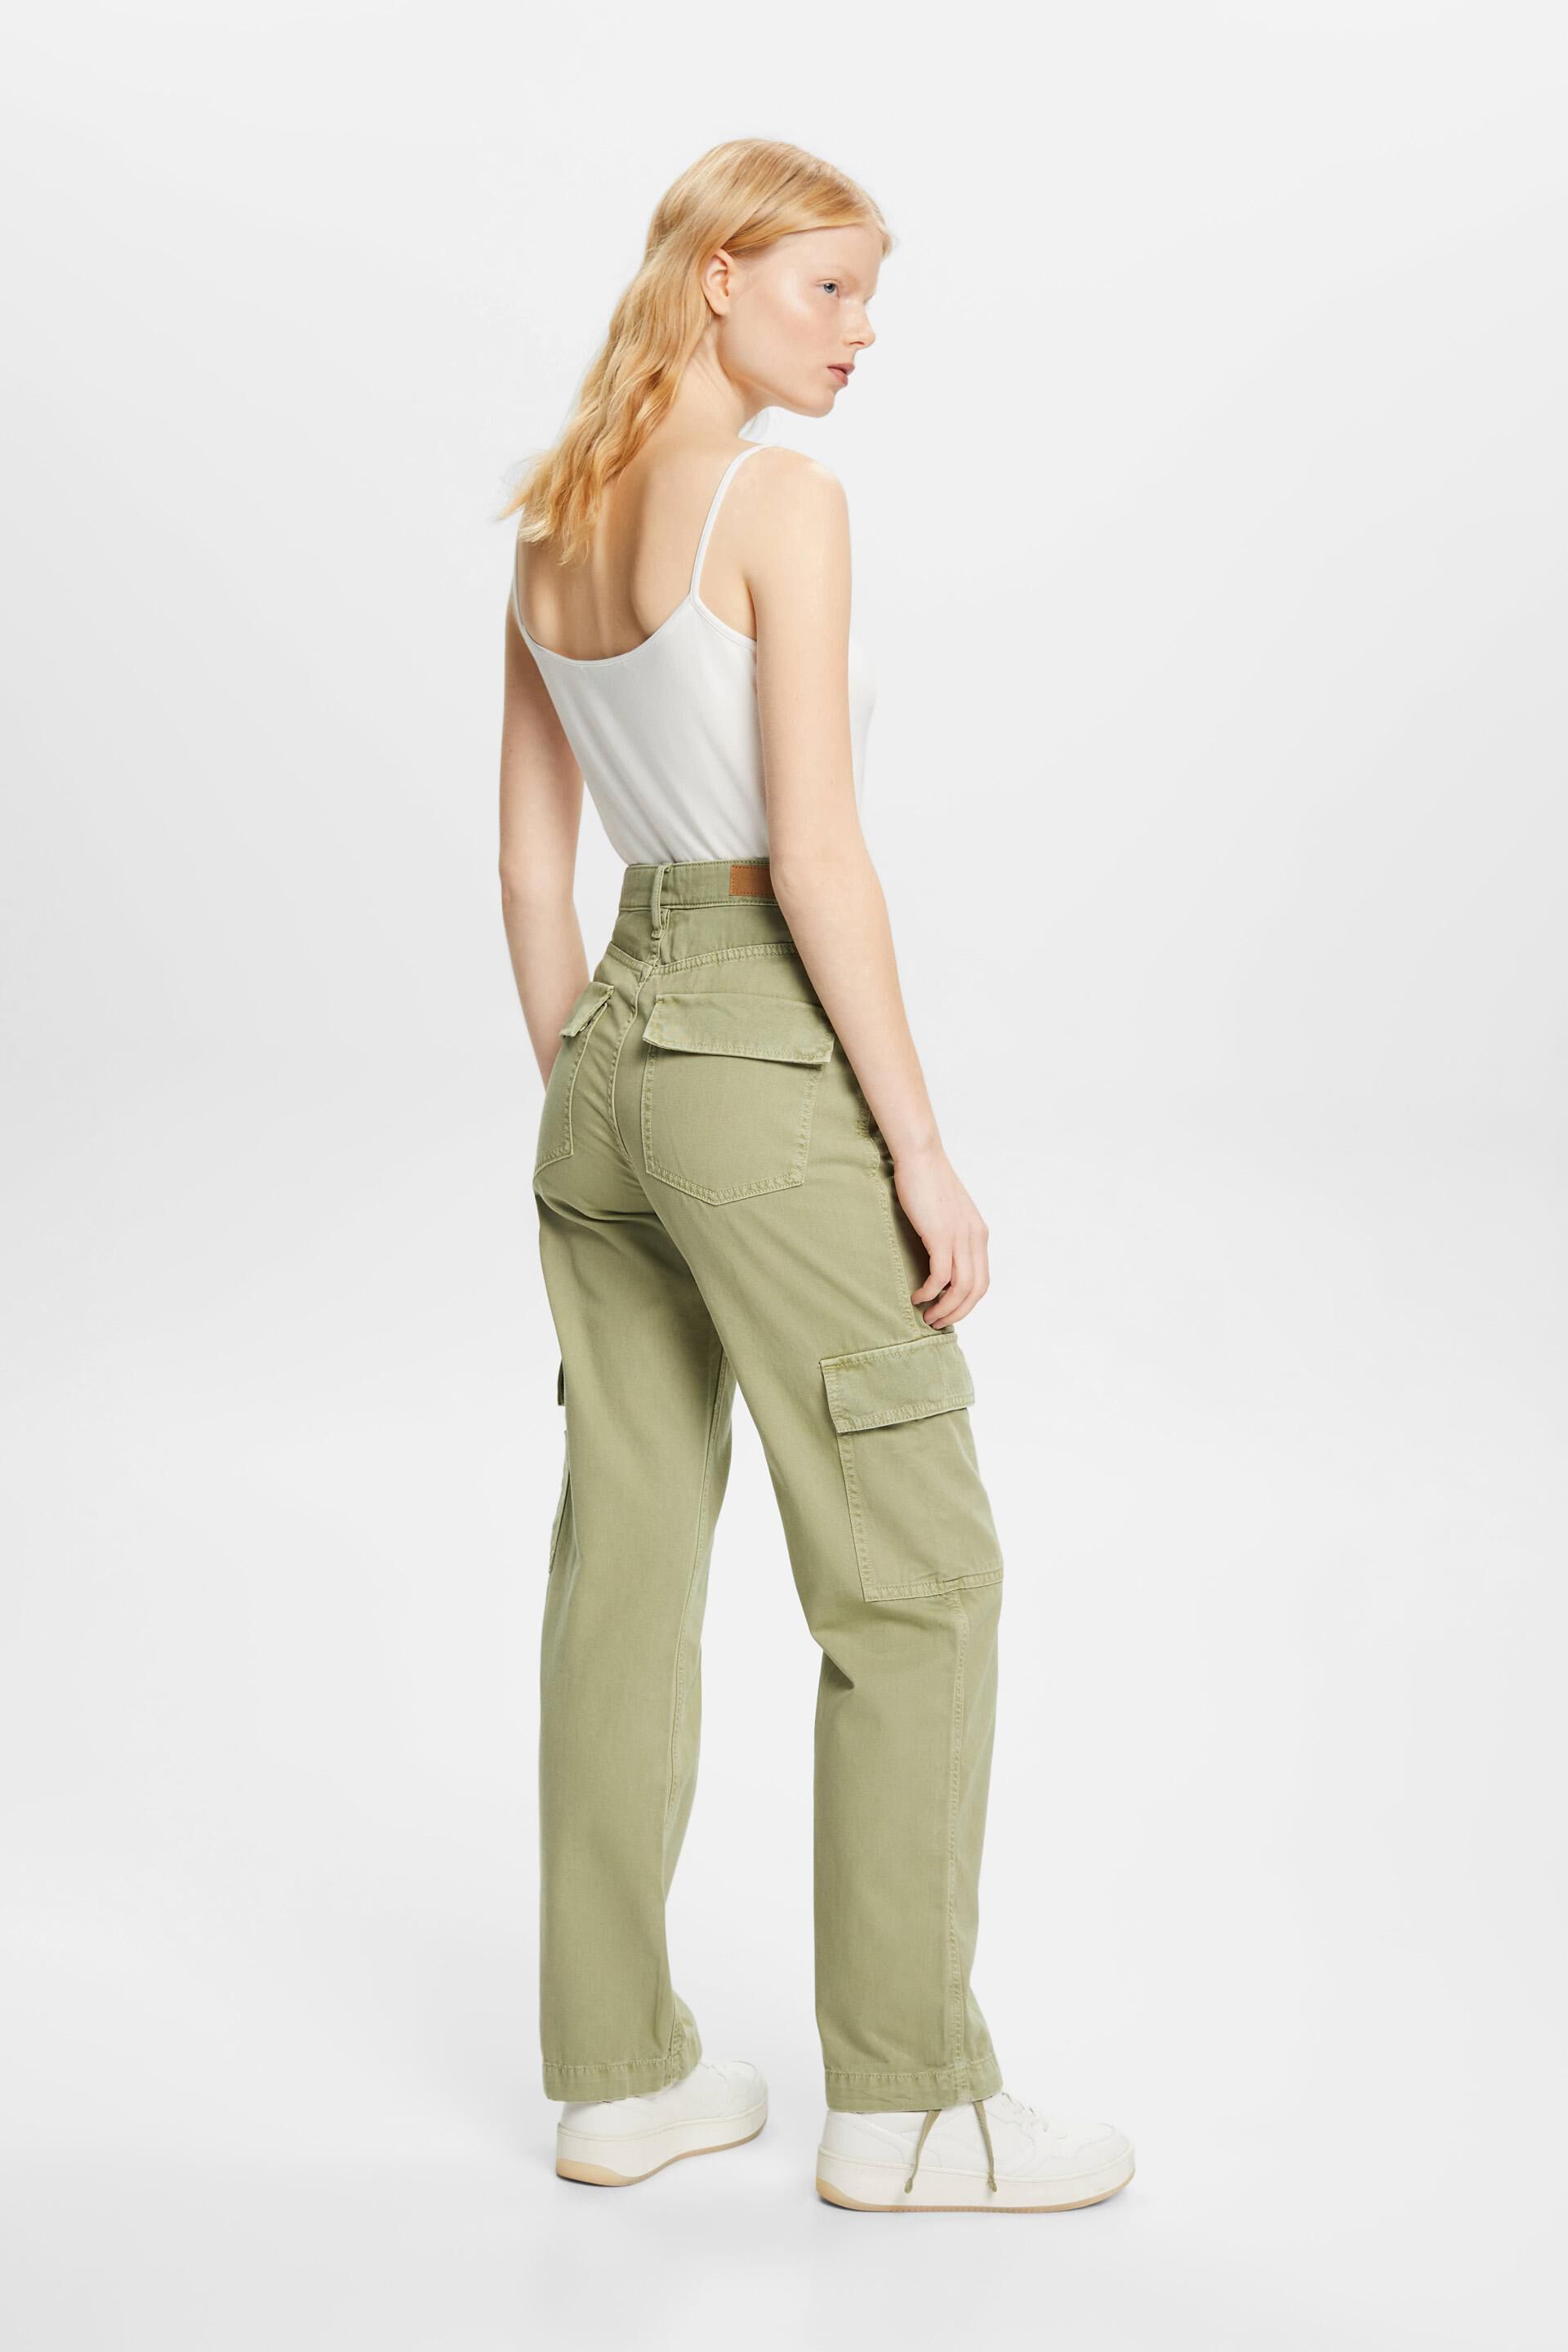 Men Letter Patched Cargo Trousers | Cargo pants outfit, Pants outfit men, Khaki  cargo pants